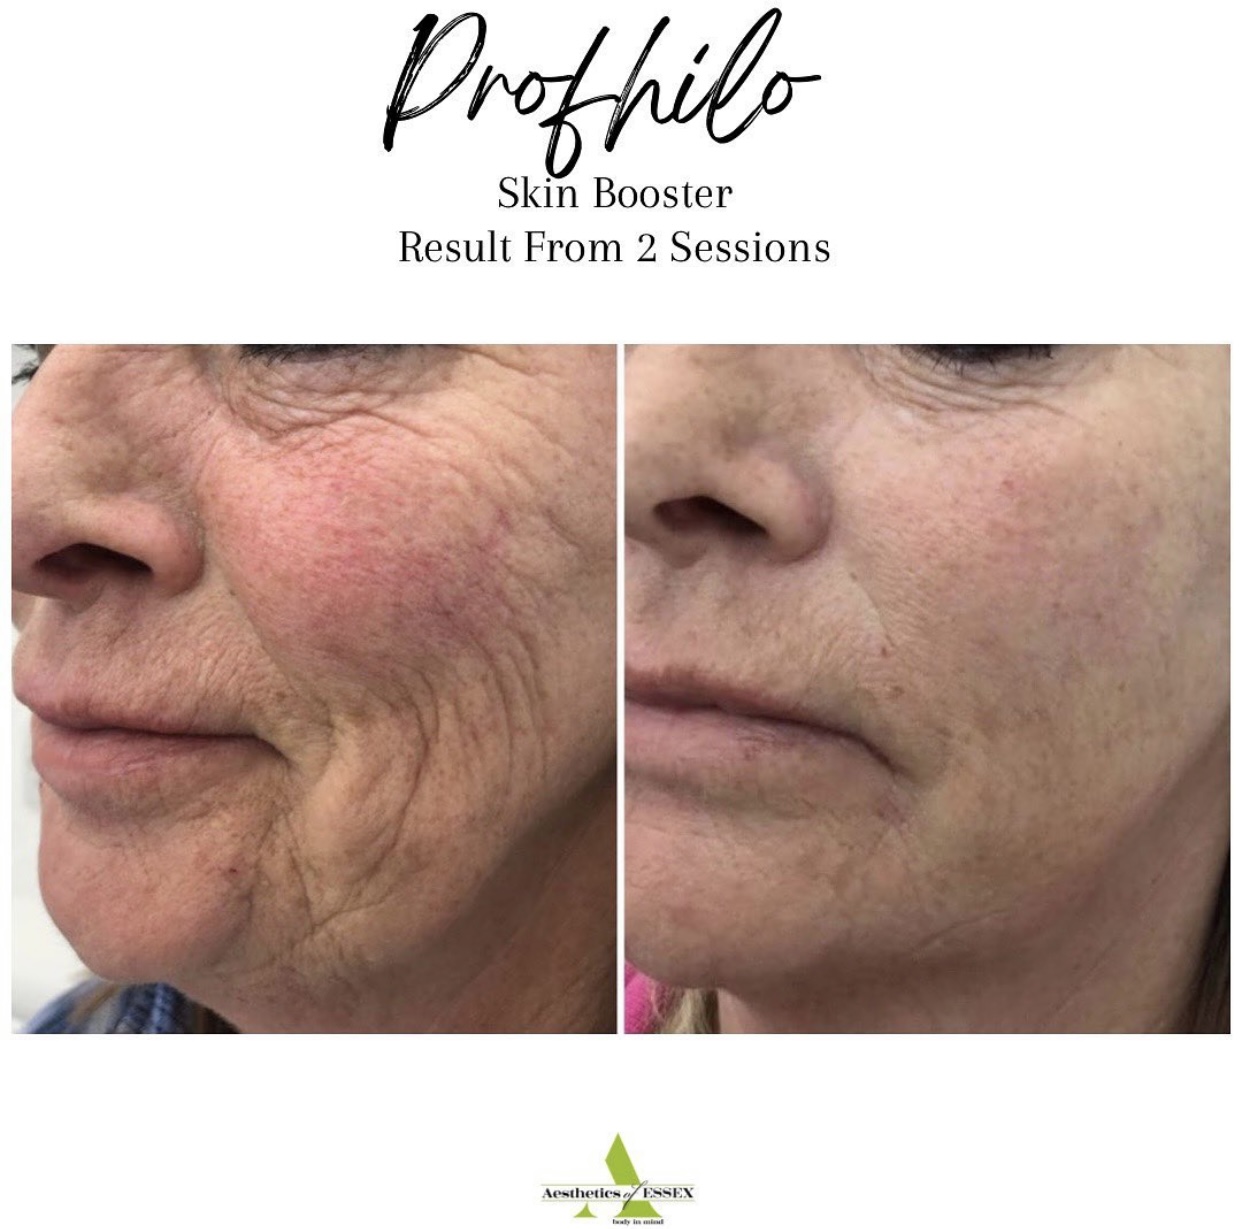 Profhilo before and after treatment